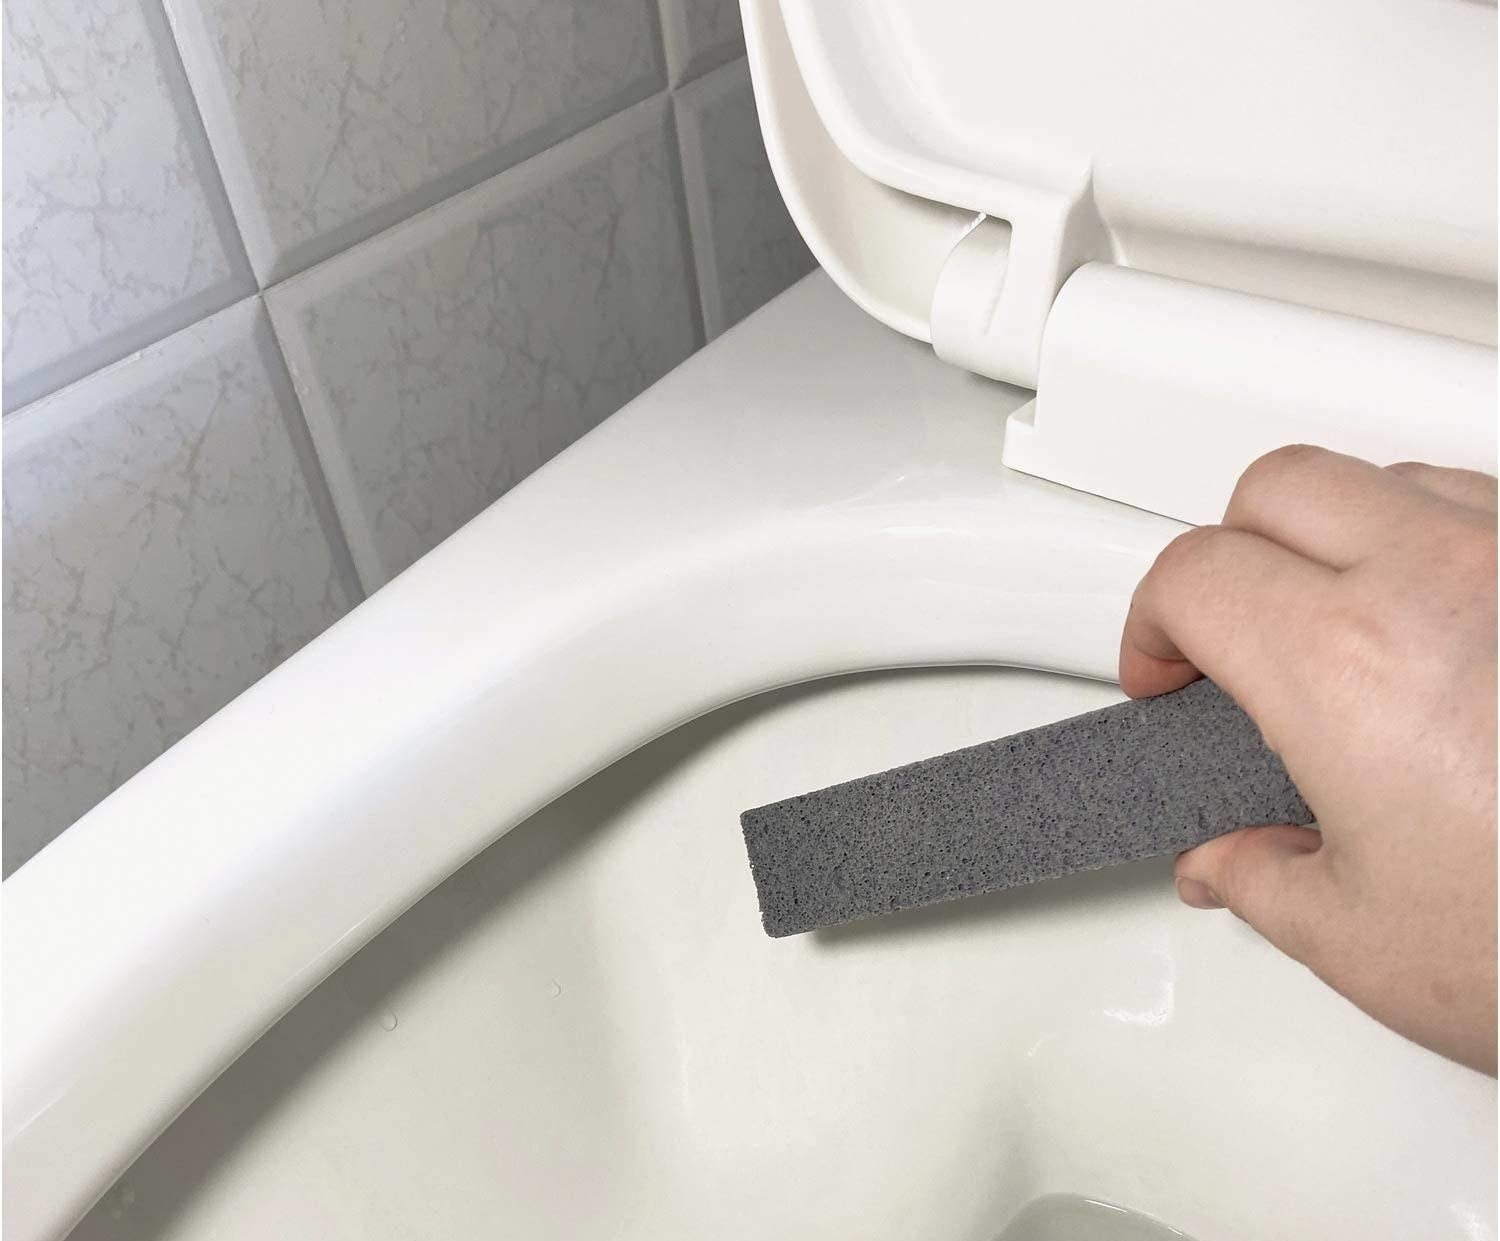 a person holding a pumice want above a toilet bowl